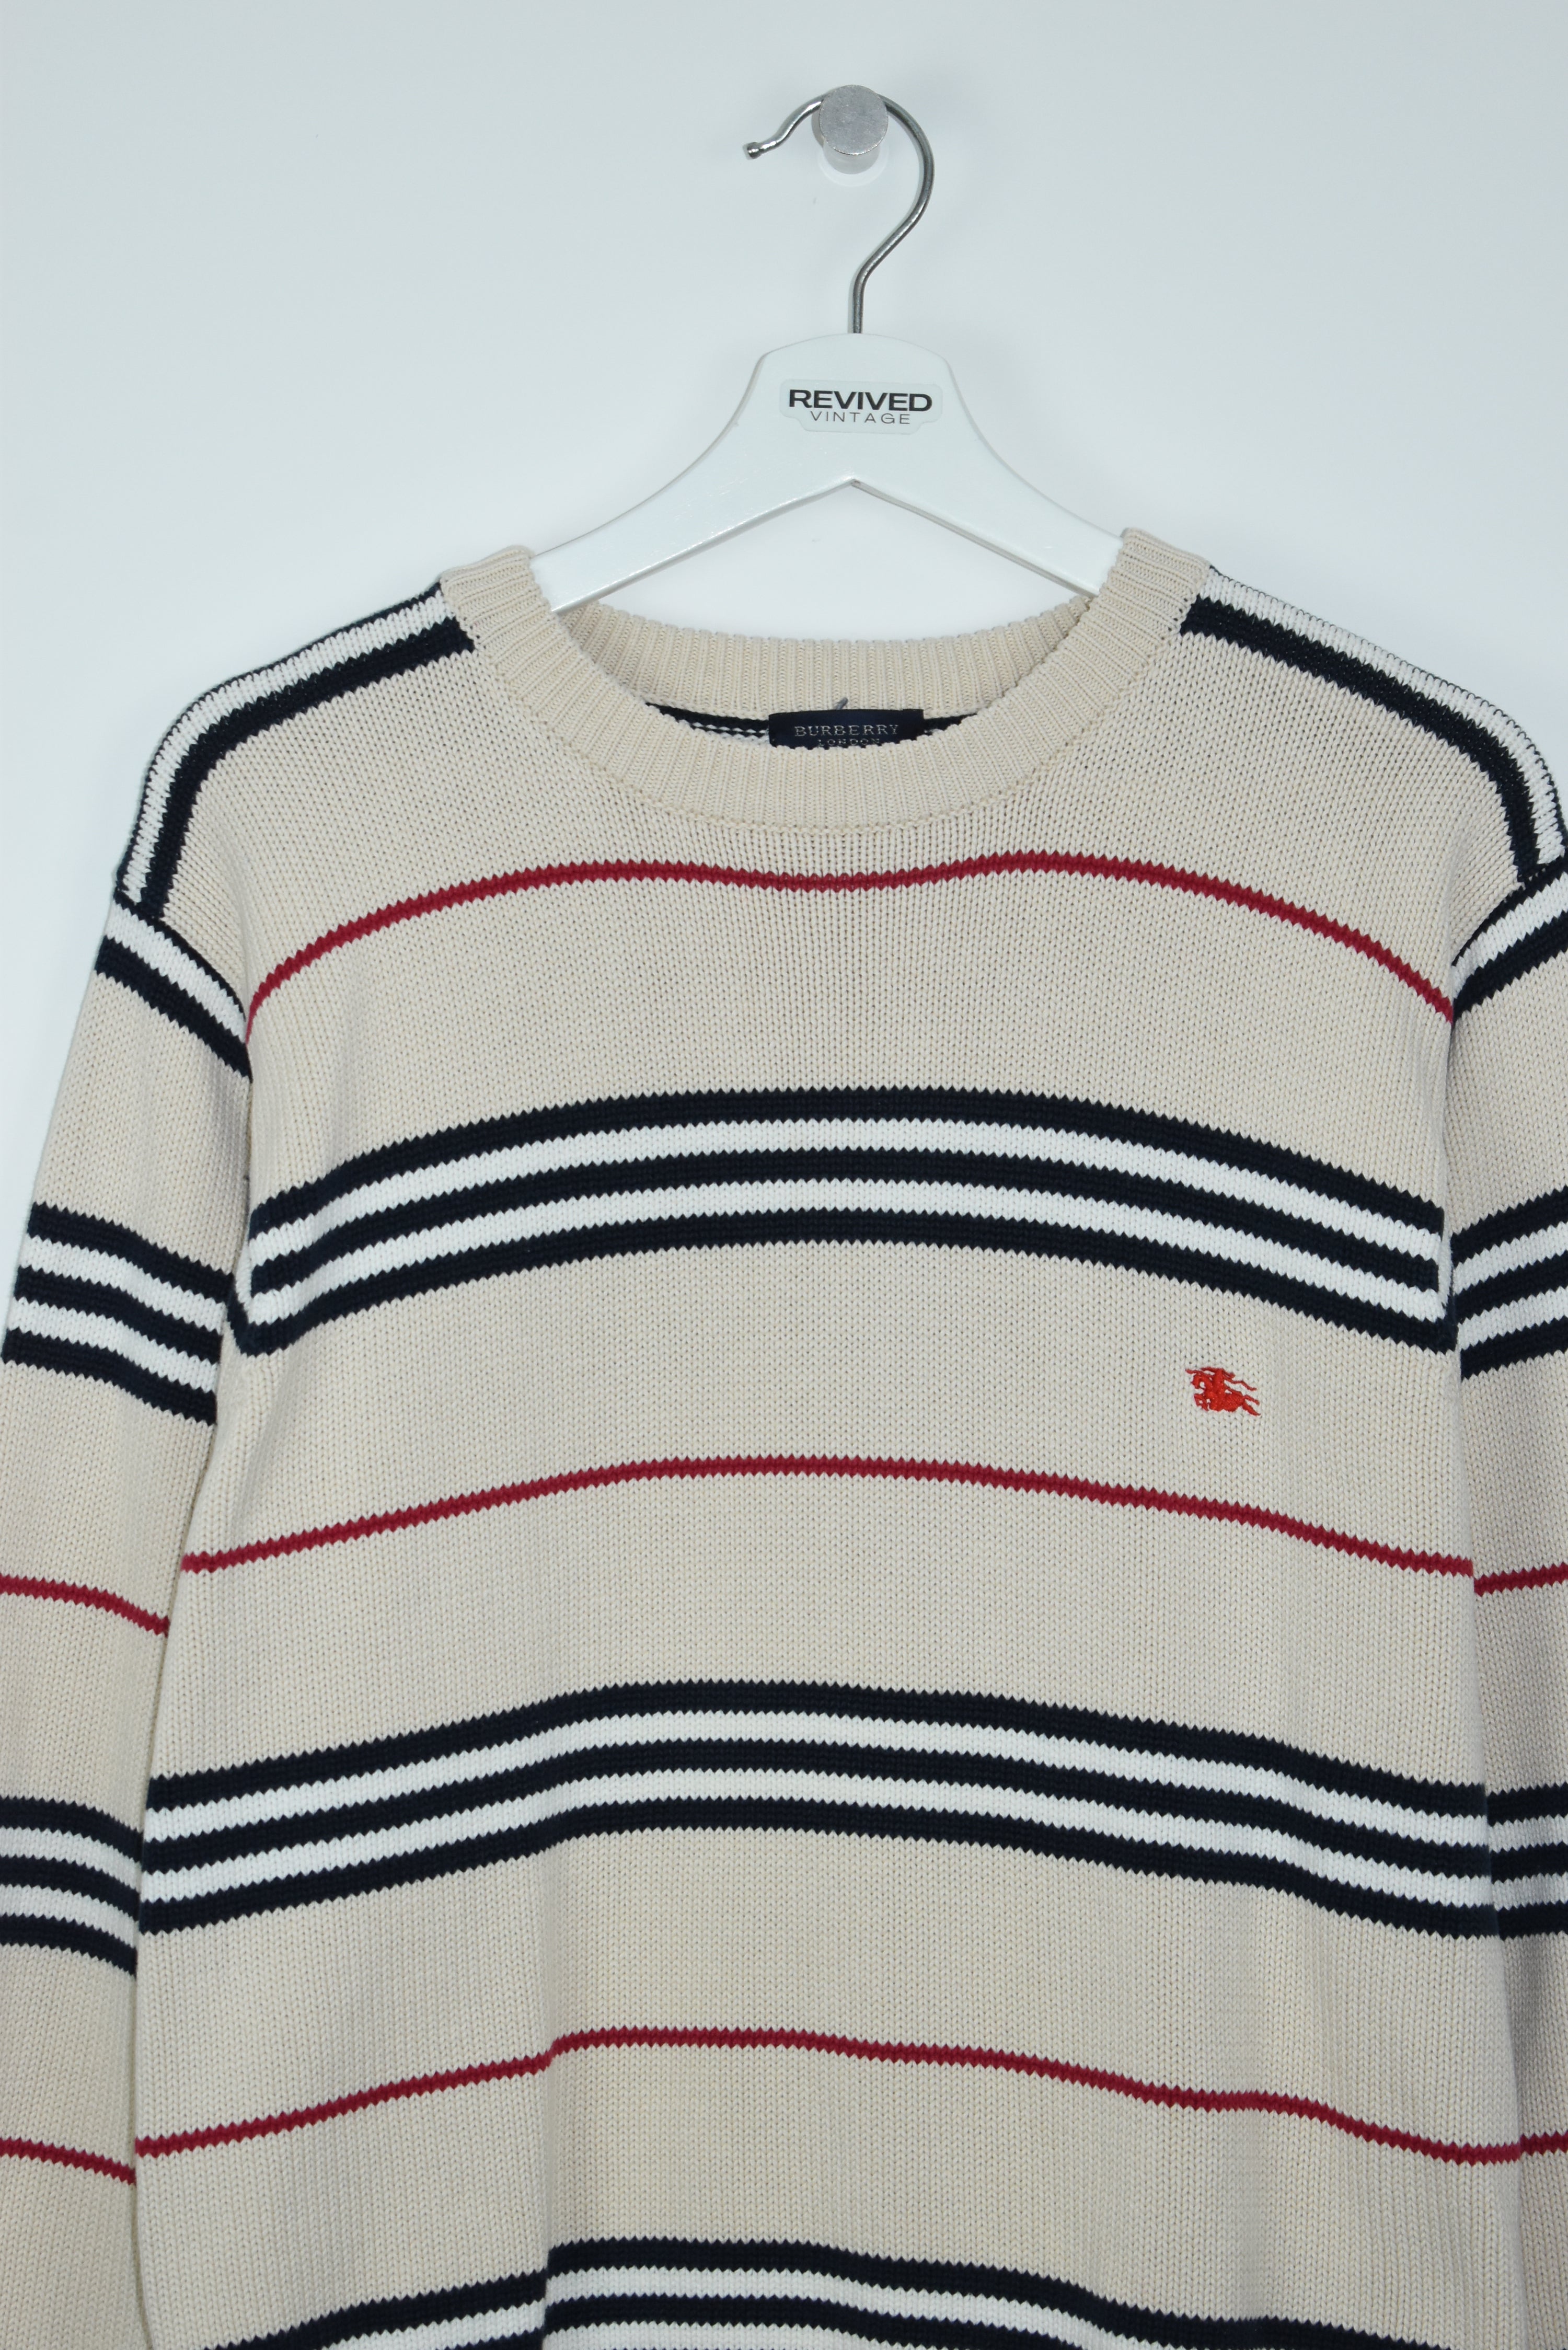 Vintage Burberry Thick Knit Sweater Small